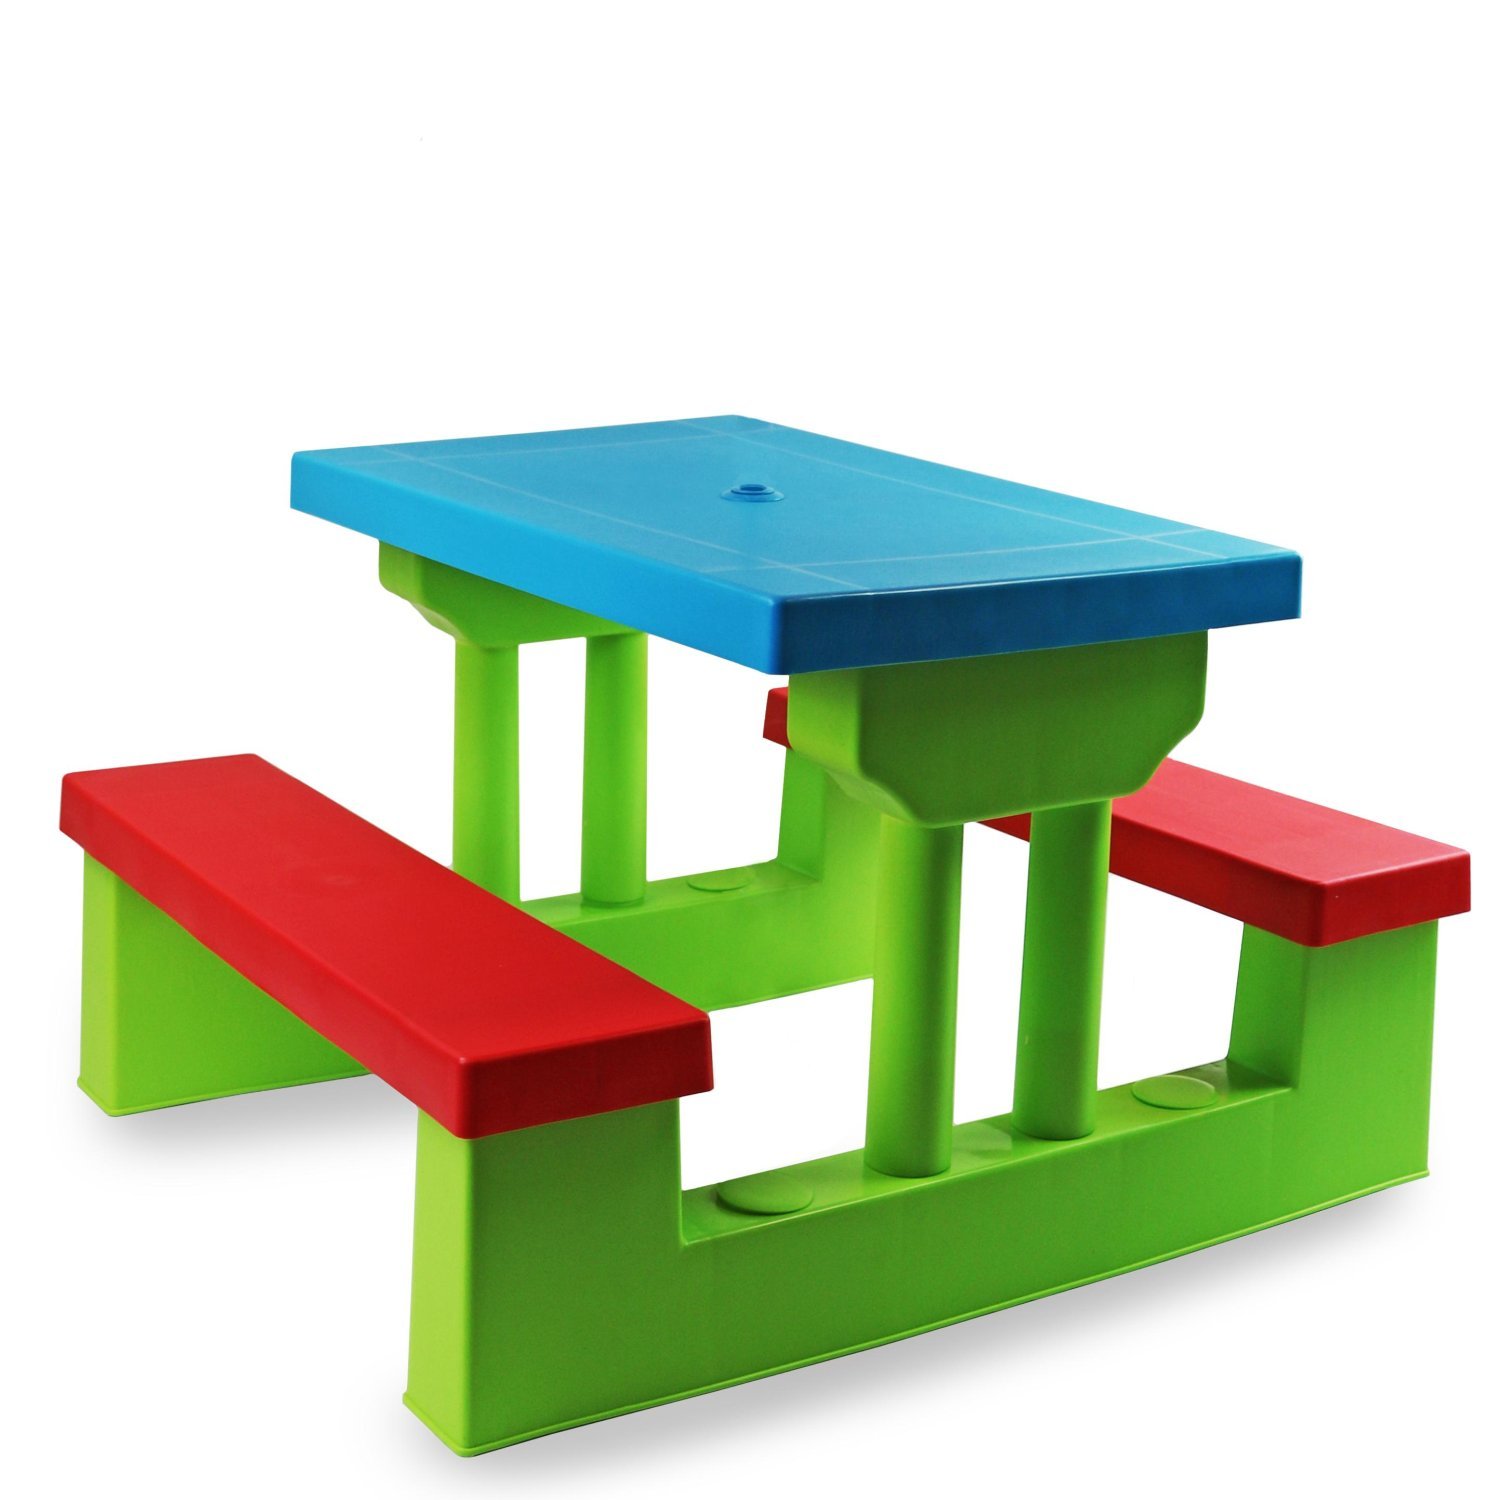 Kids Childrens Picnic Bench Table Set Outdoor Furniture - £32.99